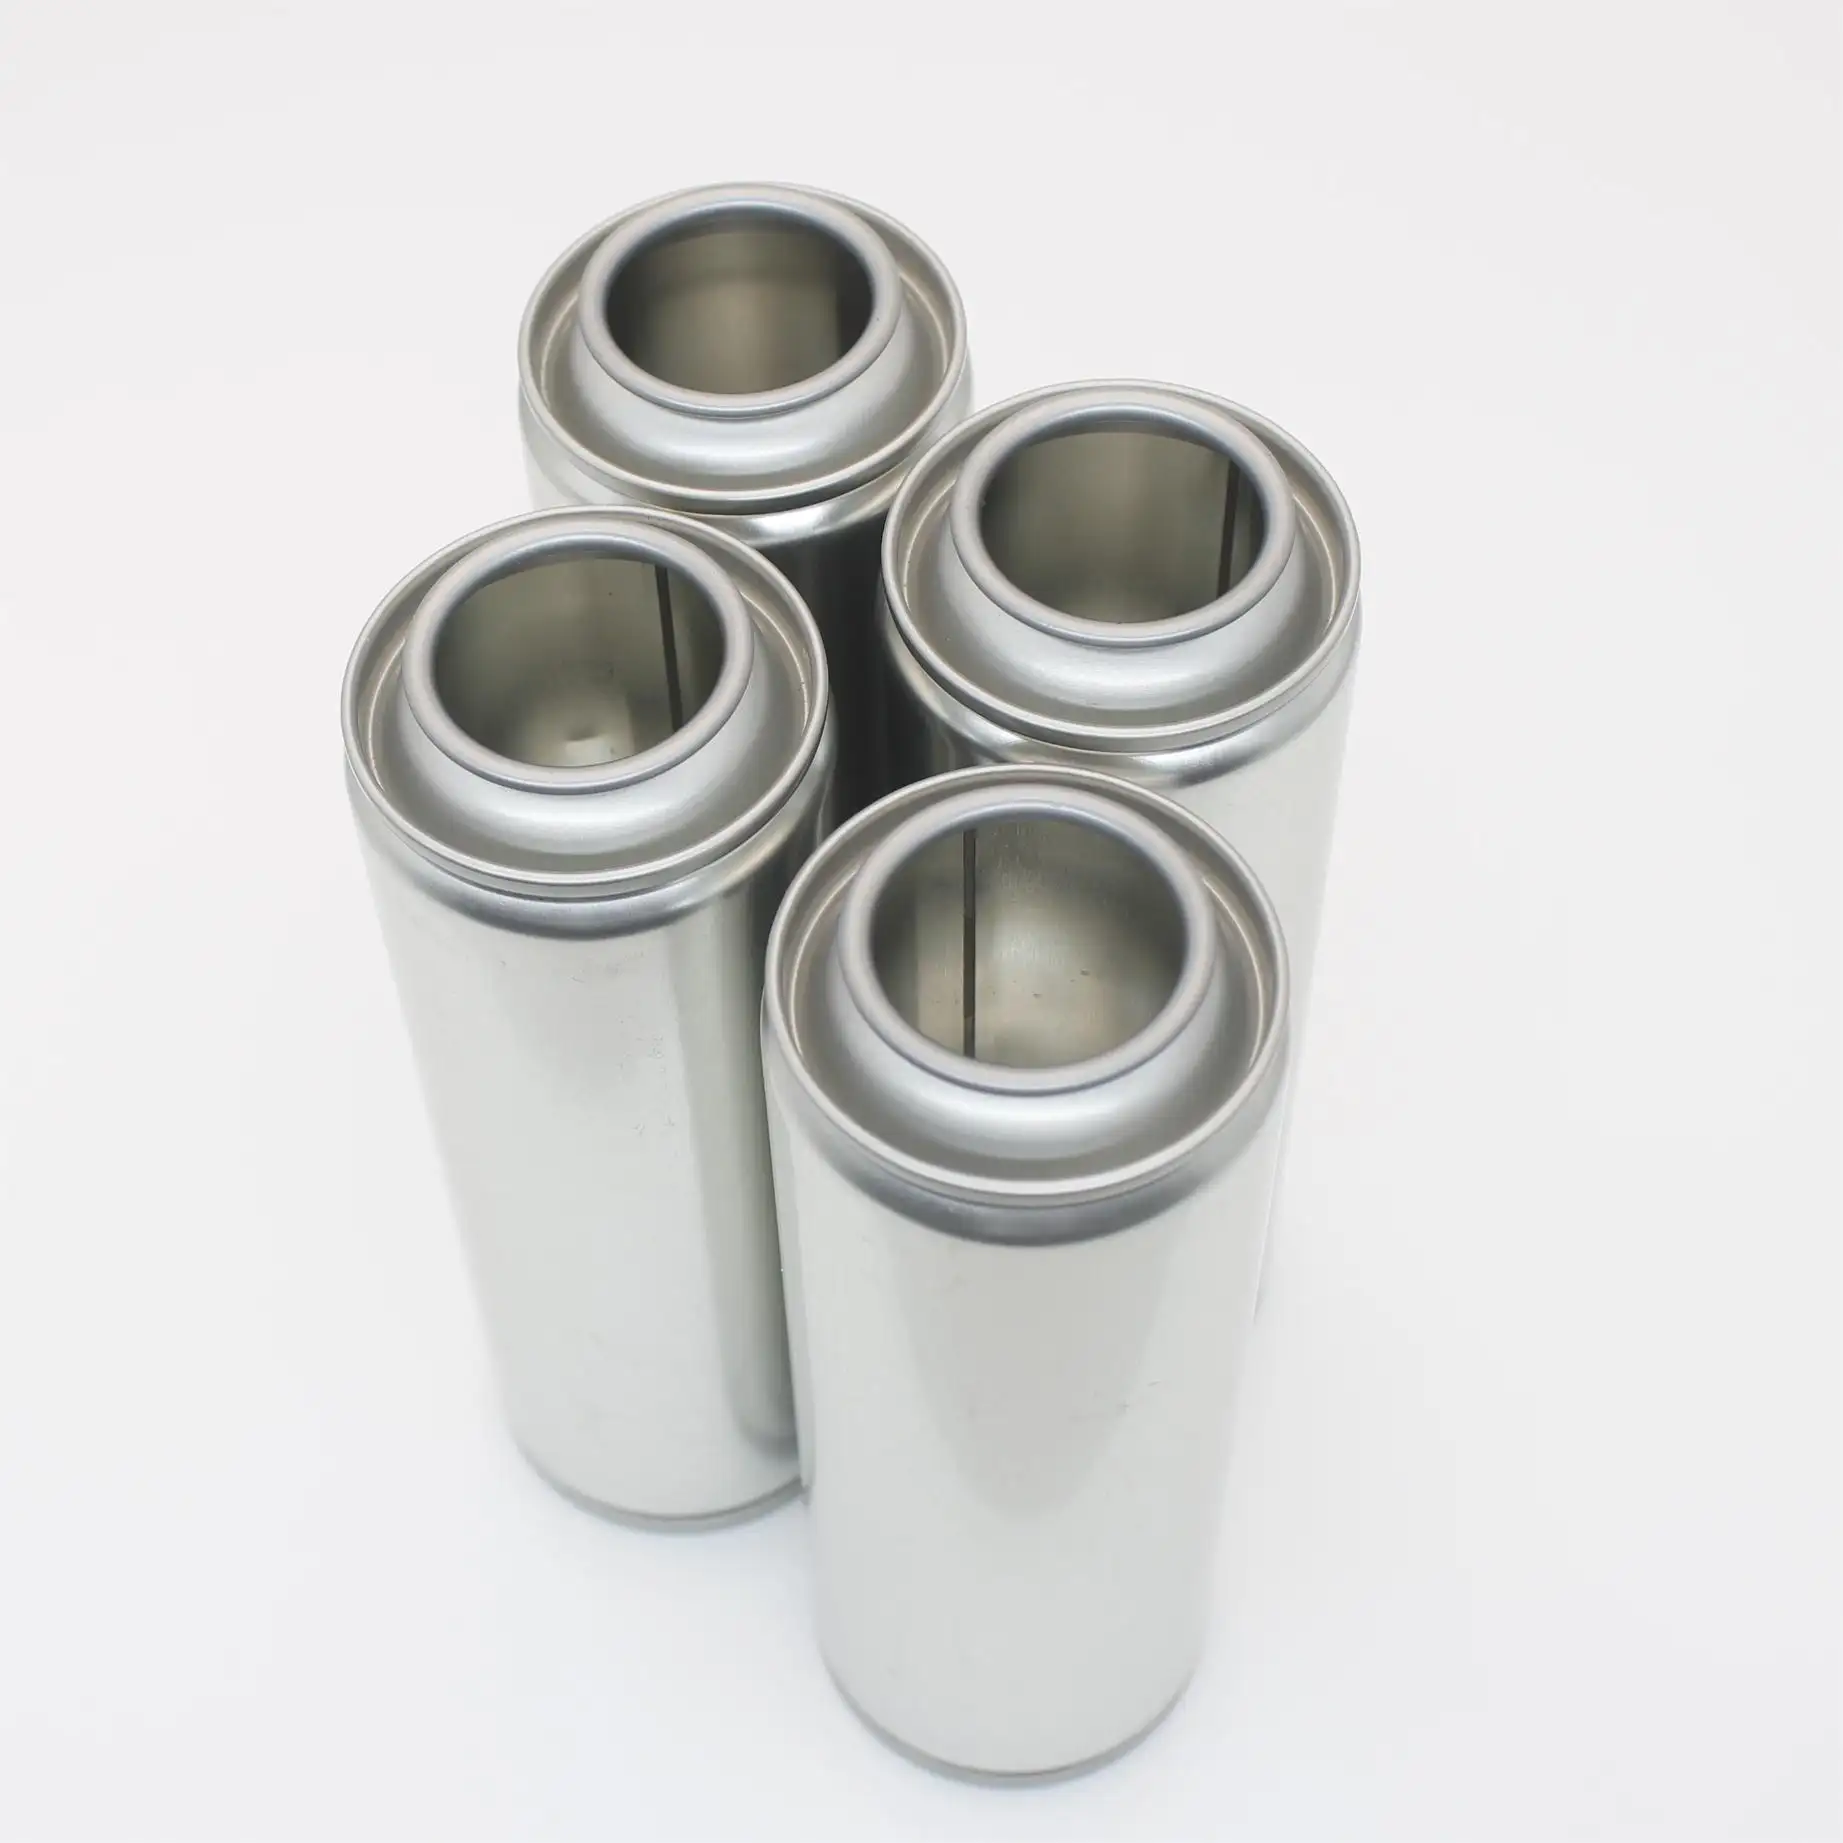 Hot sale Empty Tinplate Cans 65mm CMYK Printing 159mm straight body Butane Gas Can empty aerosol can